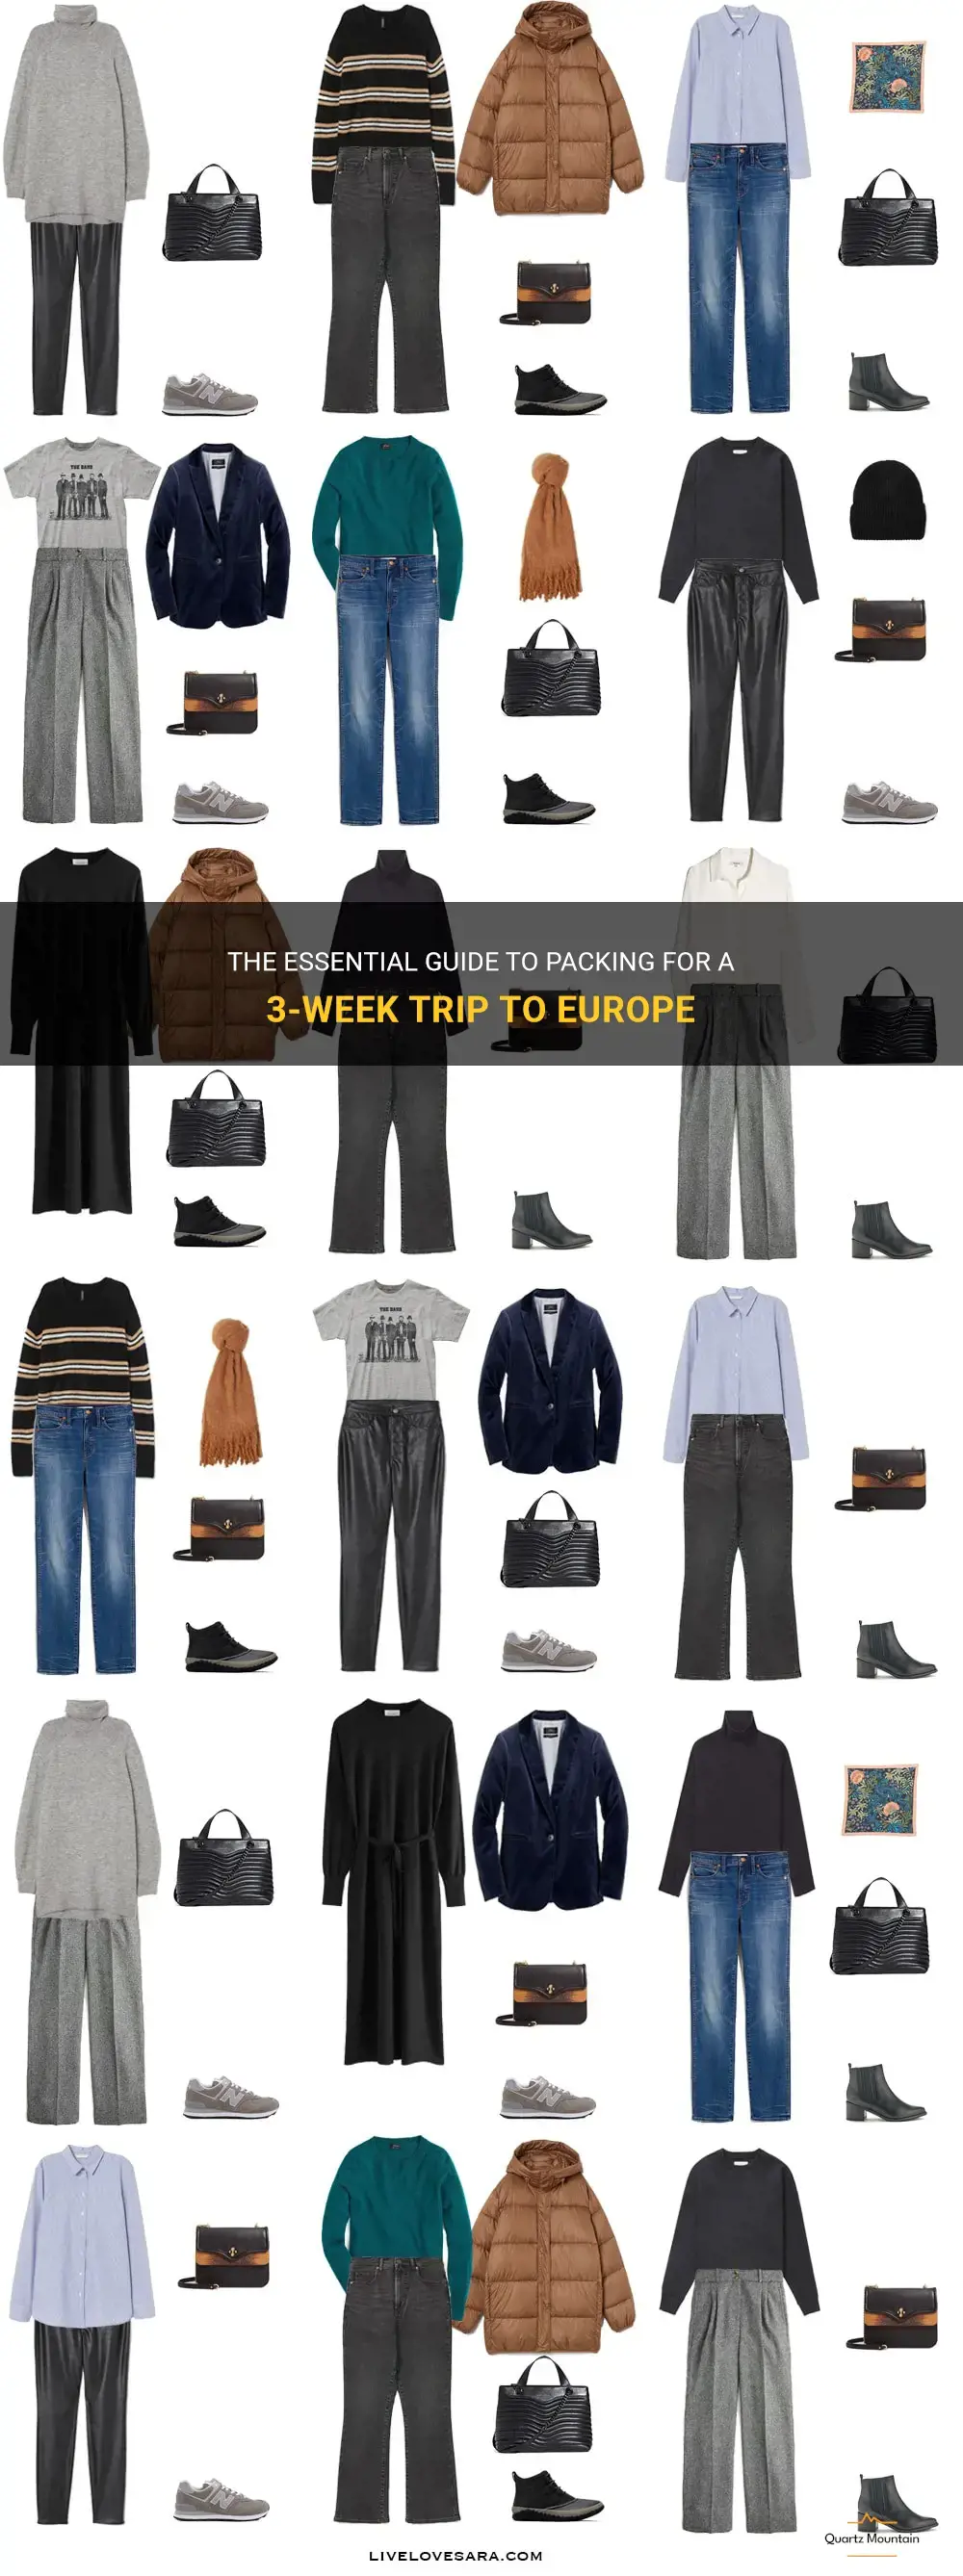 what to pack for europe for 3 weeks